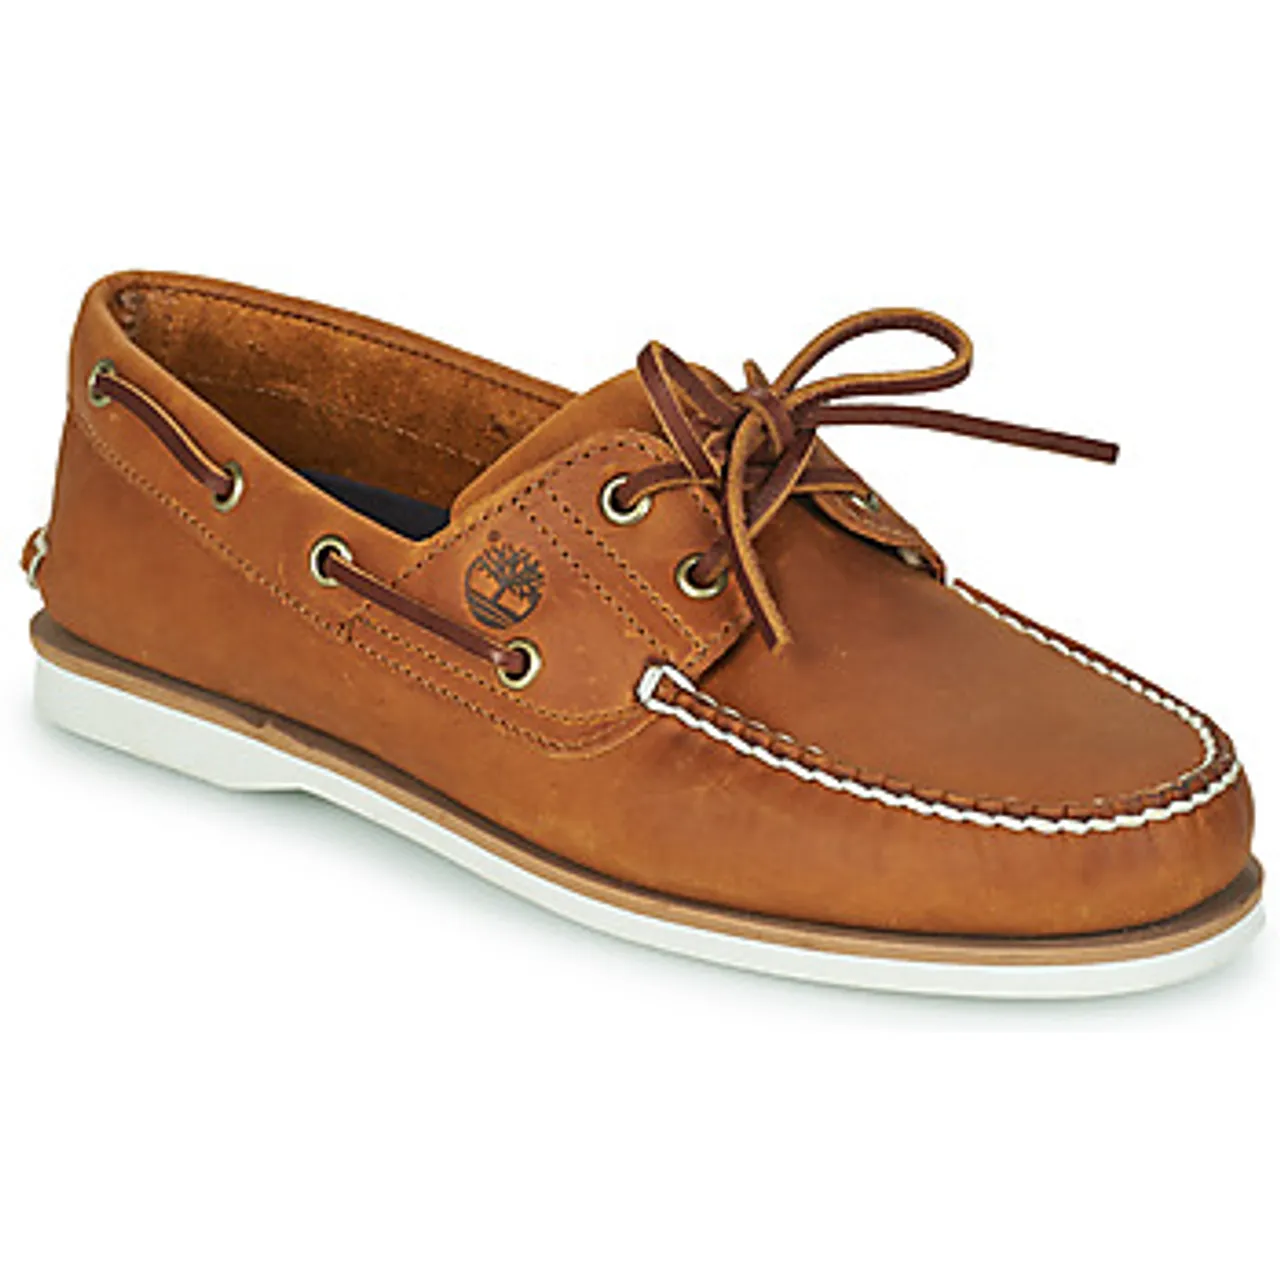 Timberland  Classic Boat 2 Eye  men's Boat Shoes in Brown